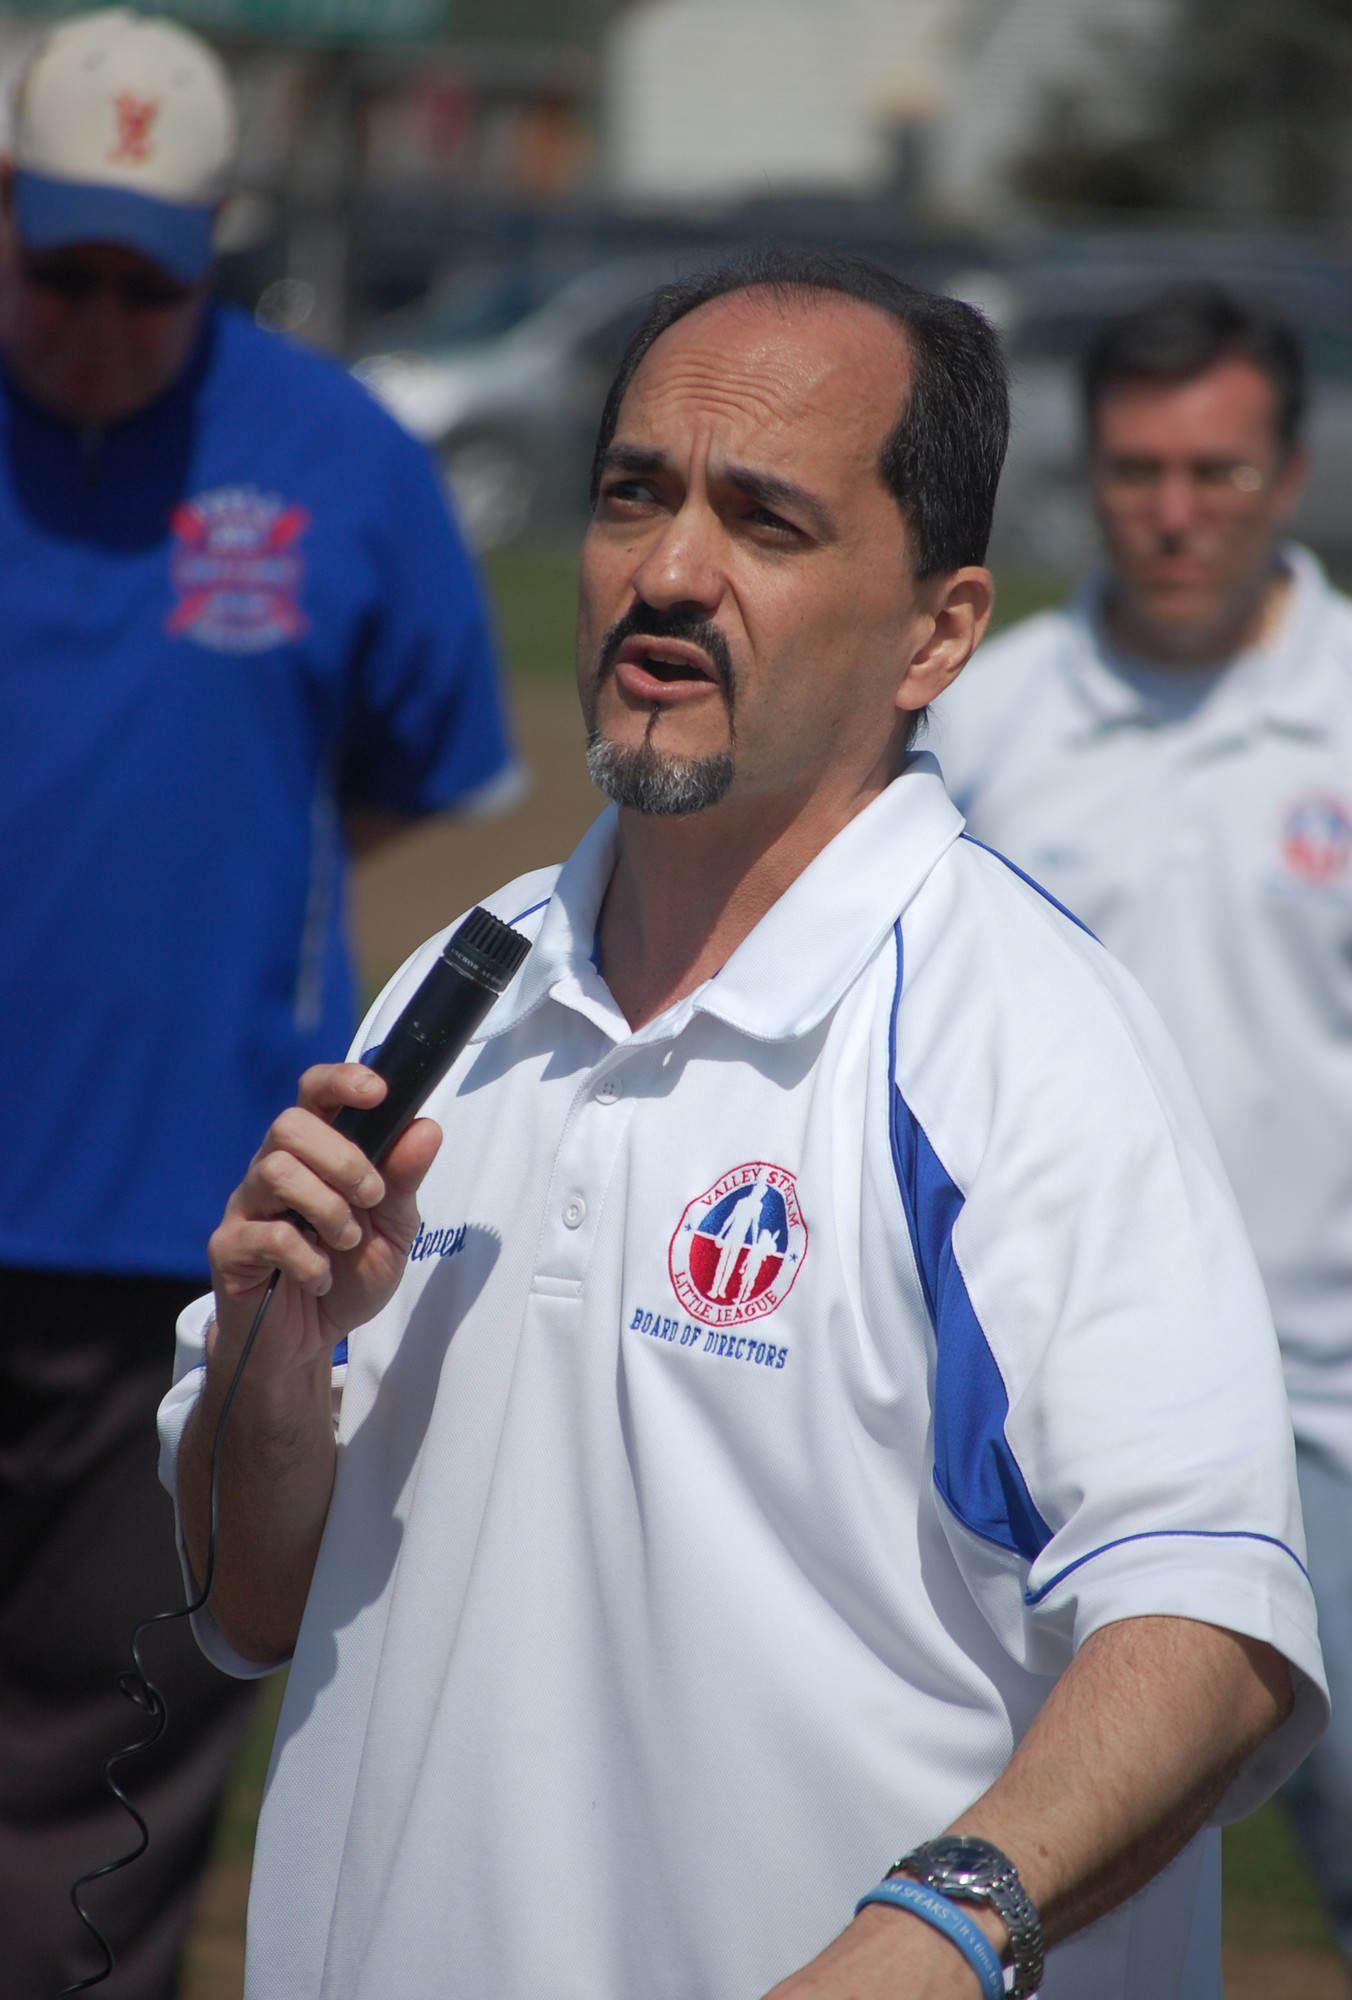 Steve Baez, who took over as league president during the winter, greeted the crowd.